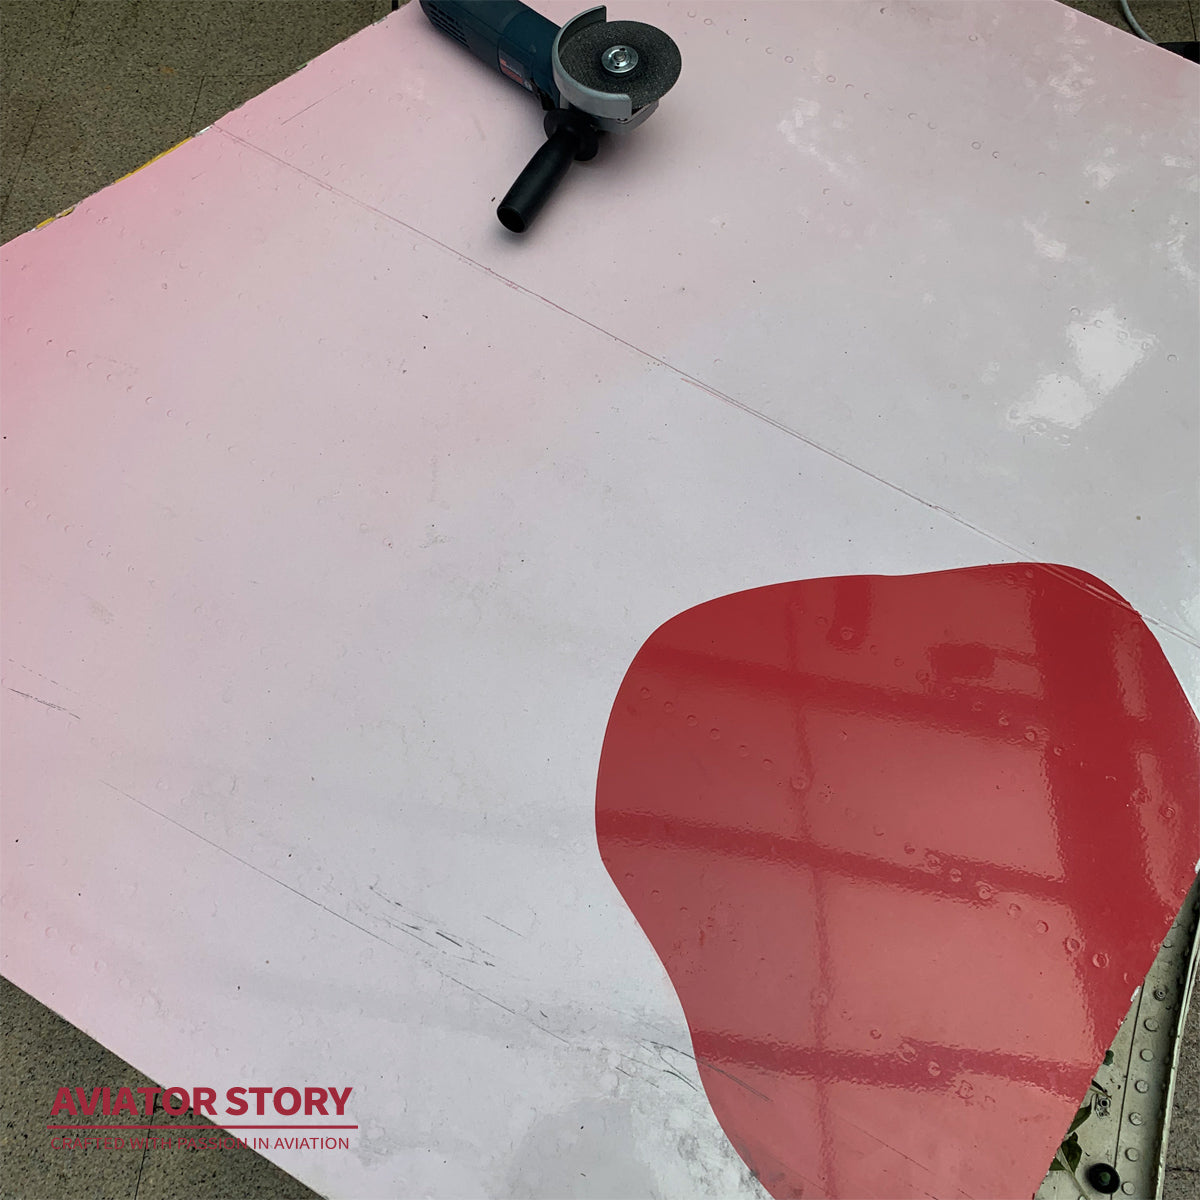 China Airlines Boeing 747-400 plane skin tag aviation tag plane tag. gift for pilot and crew. B-18206. Pink original aircraft skin tag.